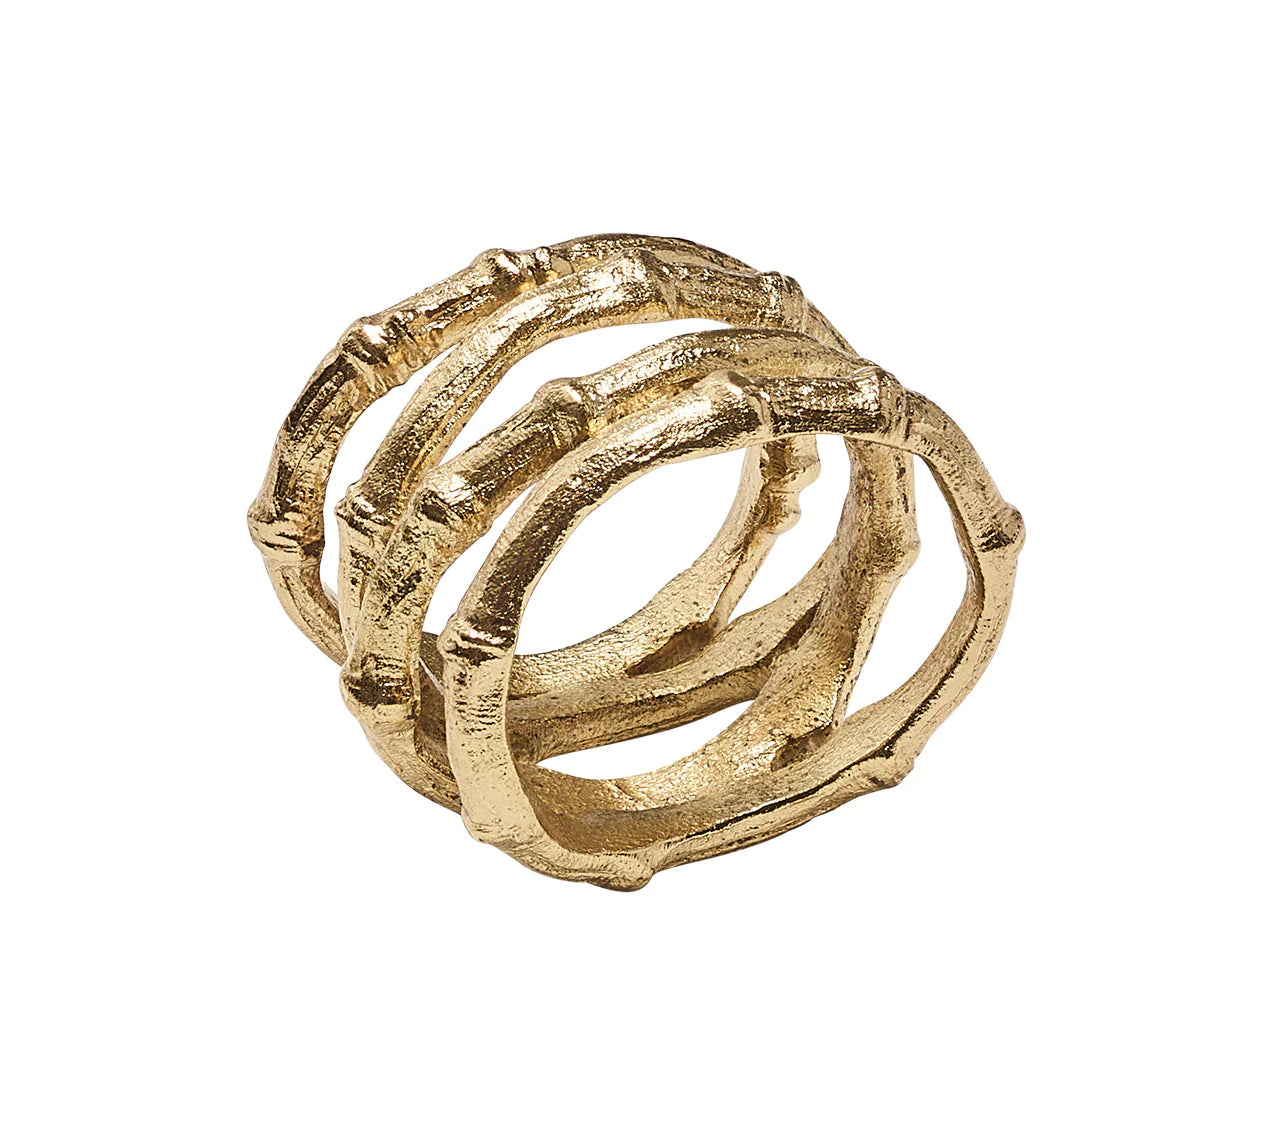 Bamboo Napkin Ring in Gold, Set of 4